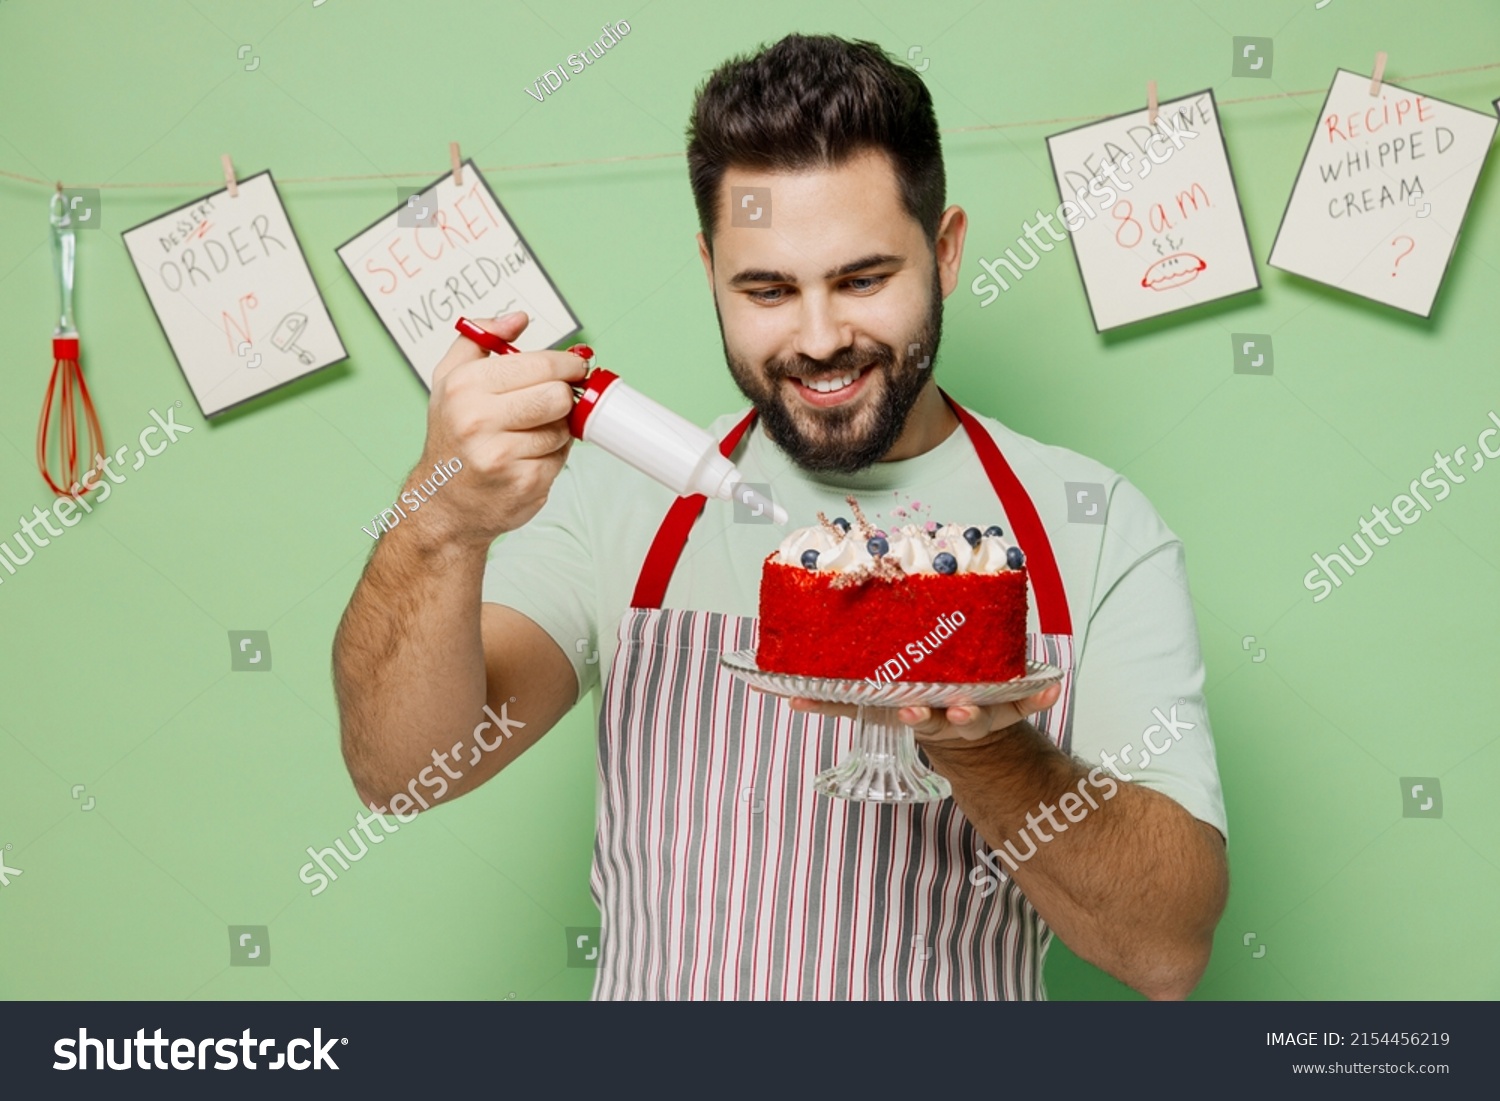 Young fun male chef confectioner baker man wear striped apron hold adorn birthday sweet dessert cake with cream isolated on plain pastel light green background studio portrait. Cooking food concept. #2154456219